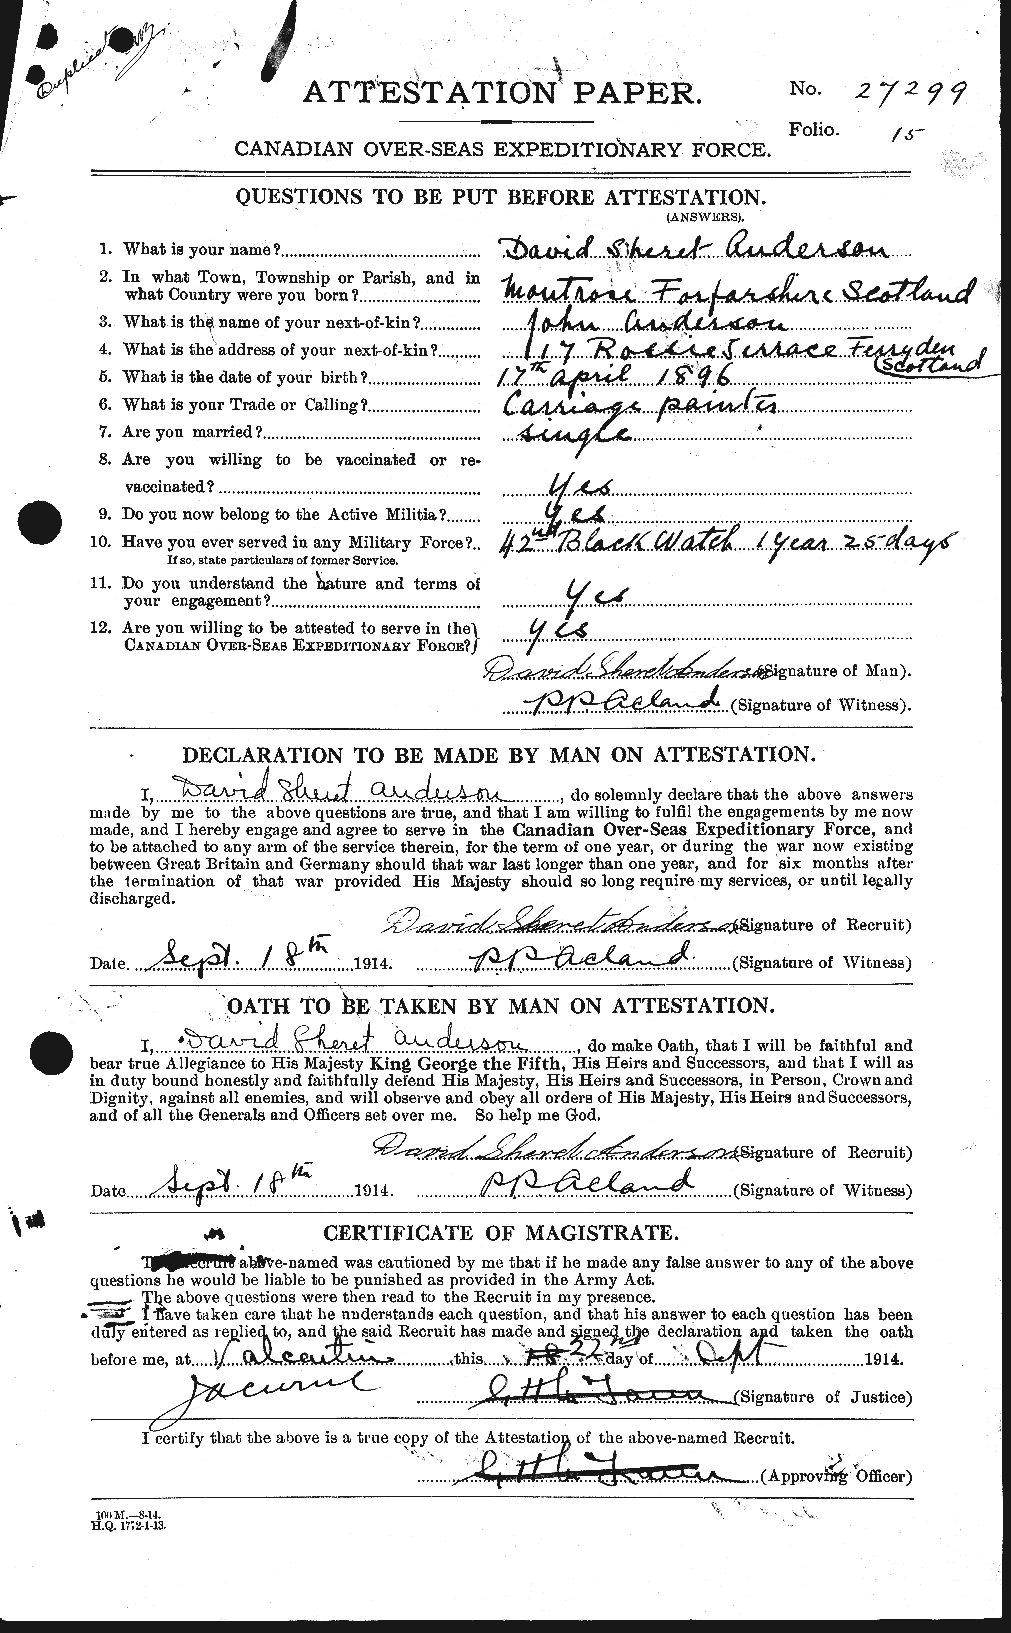 Personnel Records of the First World War - CEF 210000a